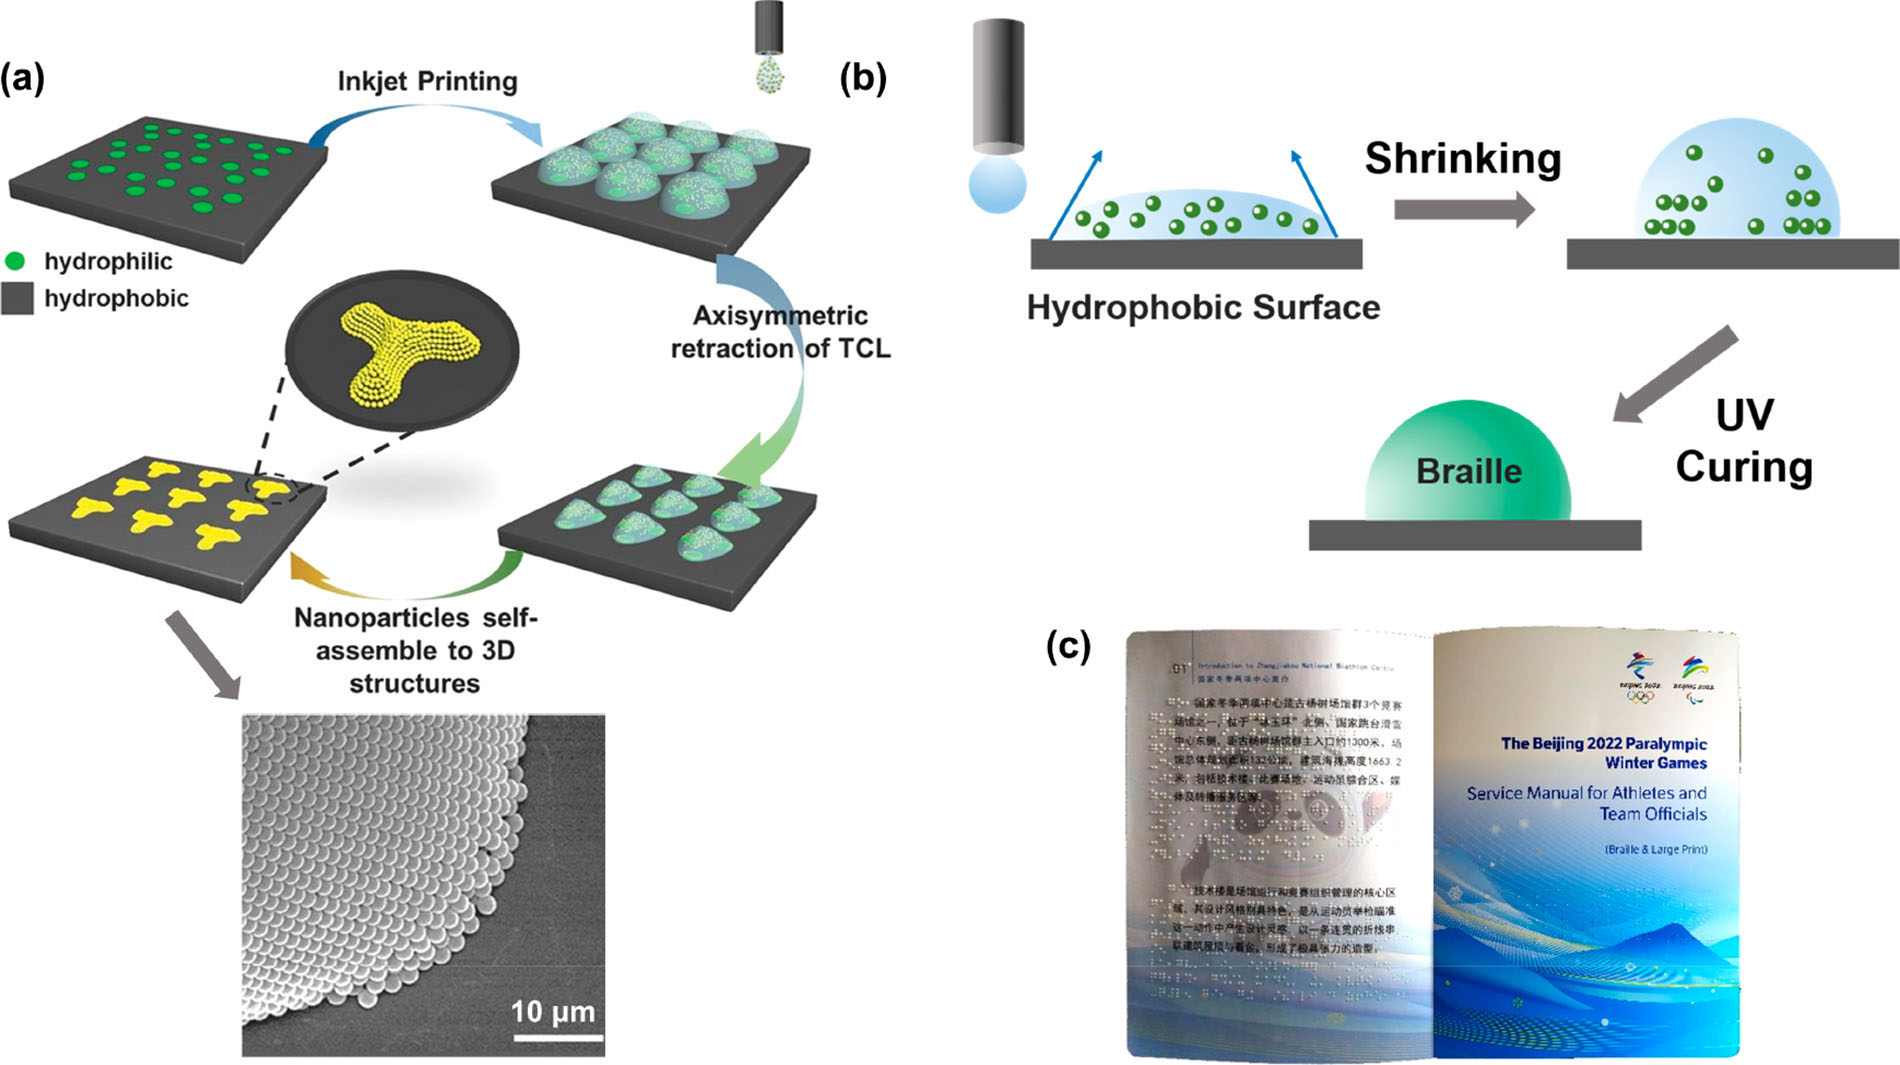 Schematic inkjet printing process of controllable 3D microstructures, and SEM image showing the assembled morphology of nanoparticles in a microdroplet